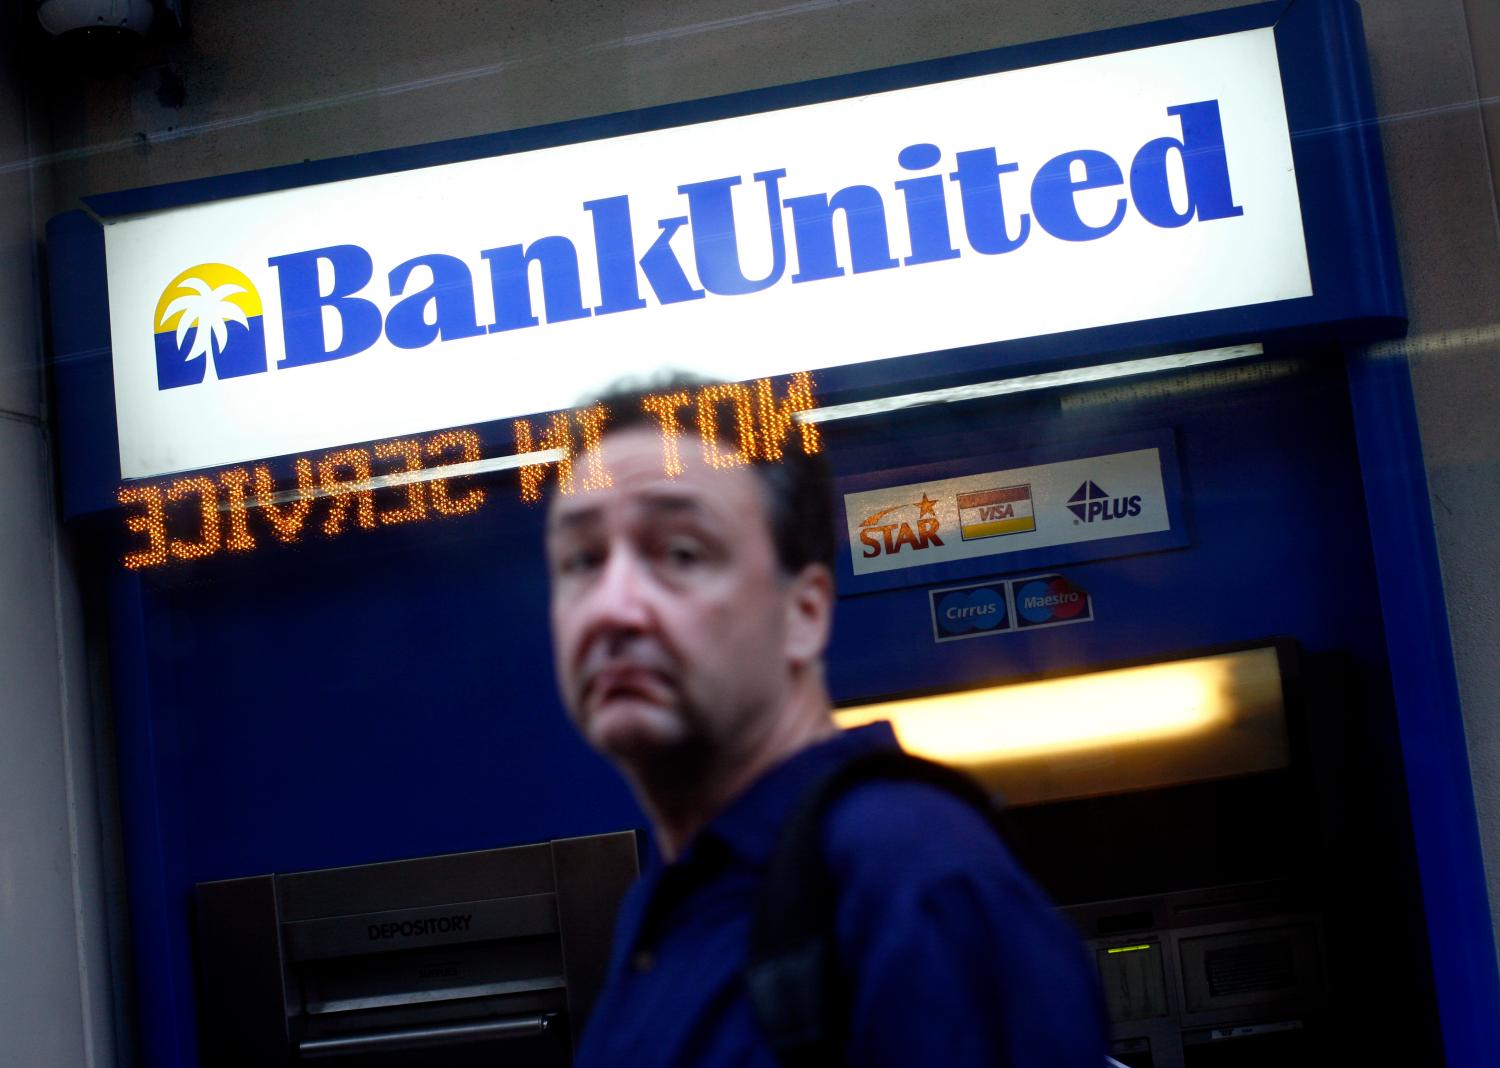 A pedestrian walks in front of a BankUnited branch in downtown Miami, Florida May 22, 2009. Florida-based BankUnited, which was closed by the U.S. government and sold to investors, was conducting business as usual on Friday and there was no sign of panic among customers, its new chief executive said. Banking industry veteran John Kanas, who also took over as chairman, told Reuters that BankUnited planned no immediate layoffs among its work force of 1,100 and expected to expand branches in its Miami base while closing branches outside the city. REUTERS/Carlos Barria  (UNITED STATES POLITICS BUSINESS) - GM1E55N06MB01